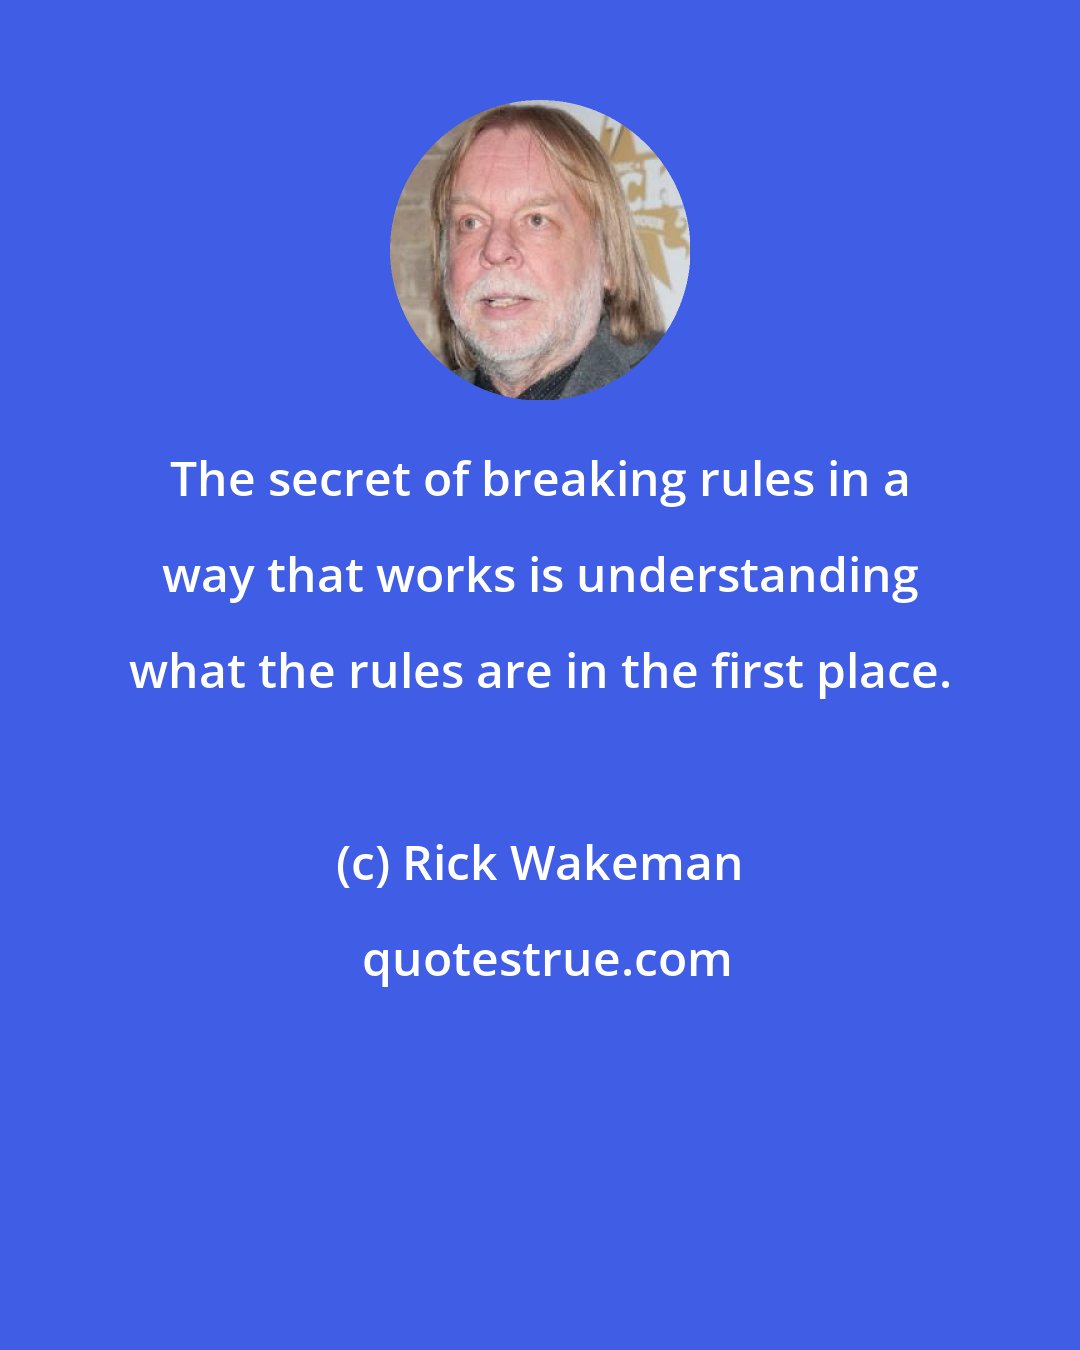 Rick Wakeman: The secret of breaking rules in a way that works is understanding what the rules are in the first place.